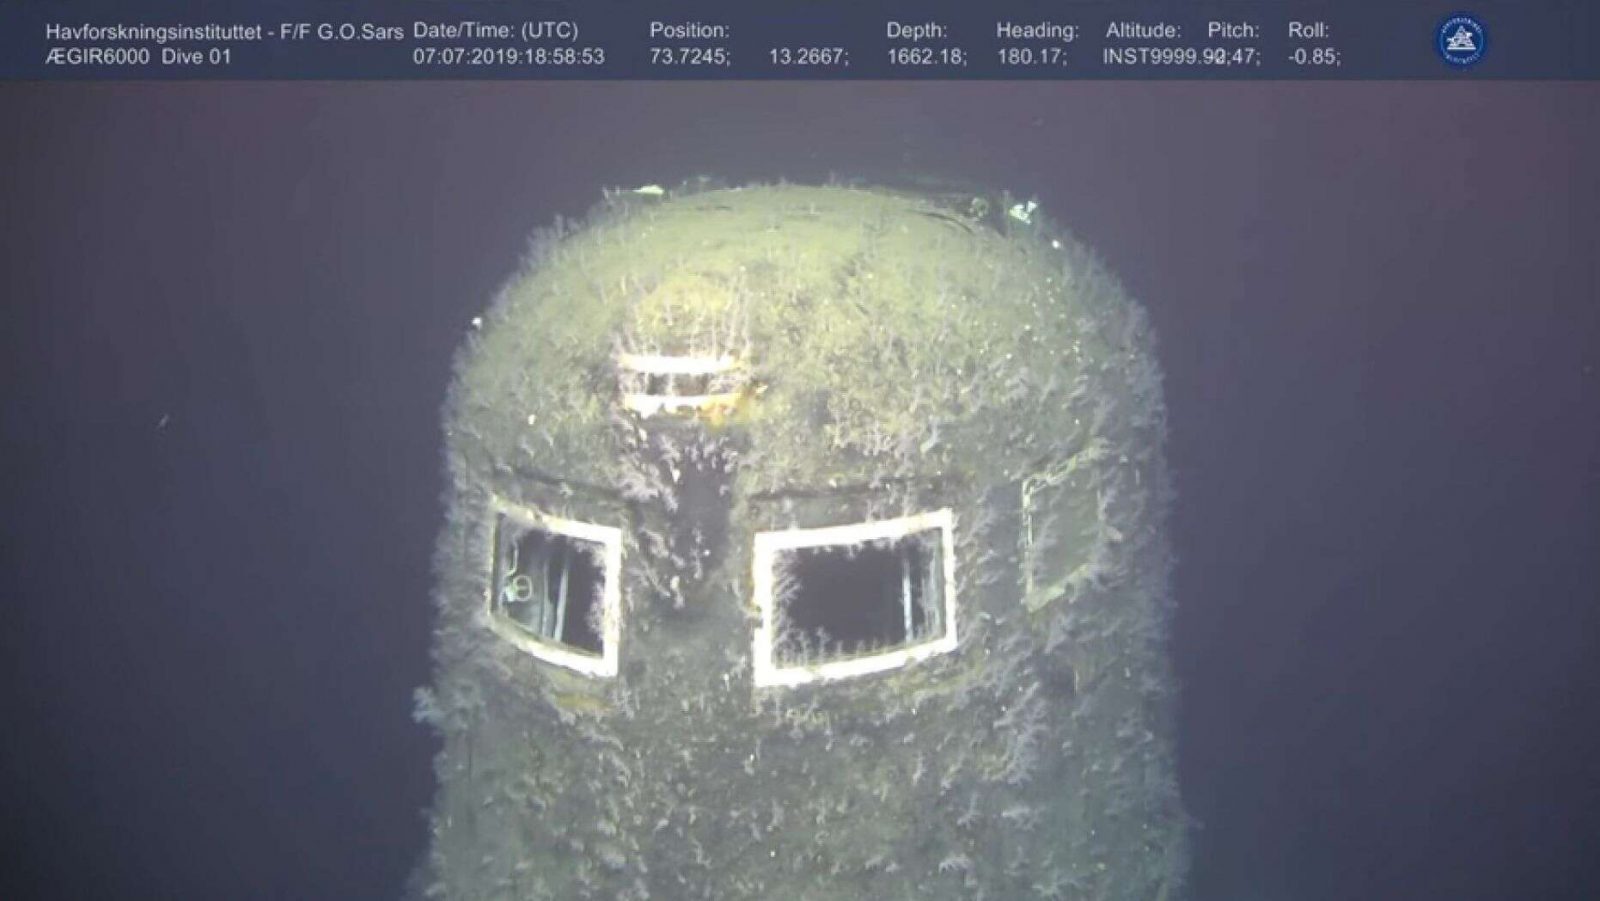 Scientists discover Radiation leak from Sunken Nuclear Submarine at Levels 800,000 times normal